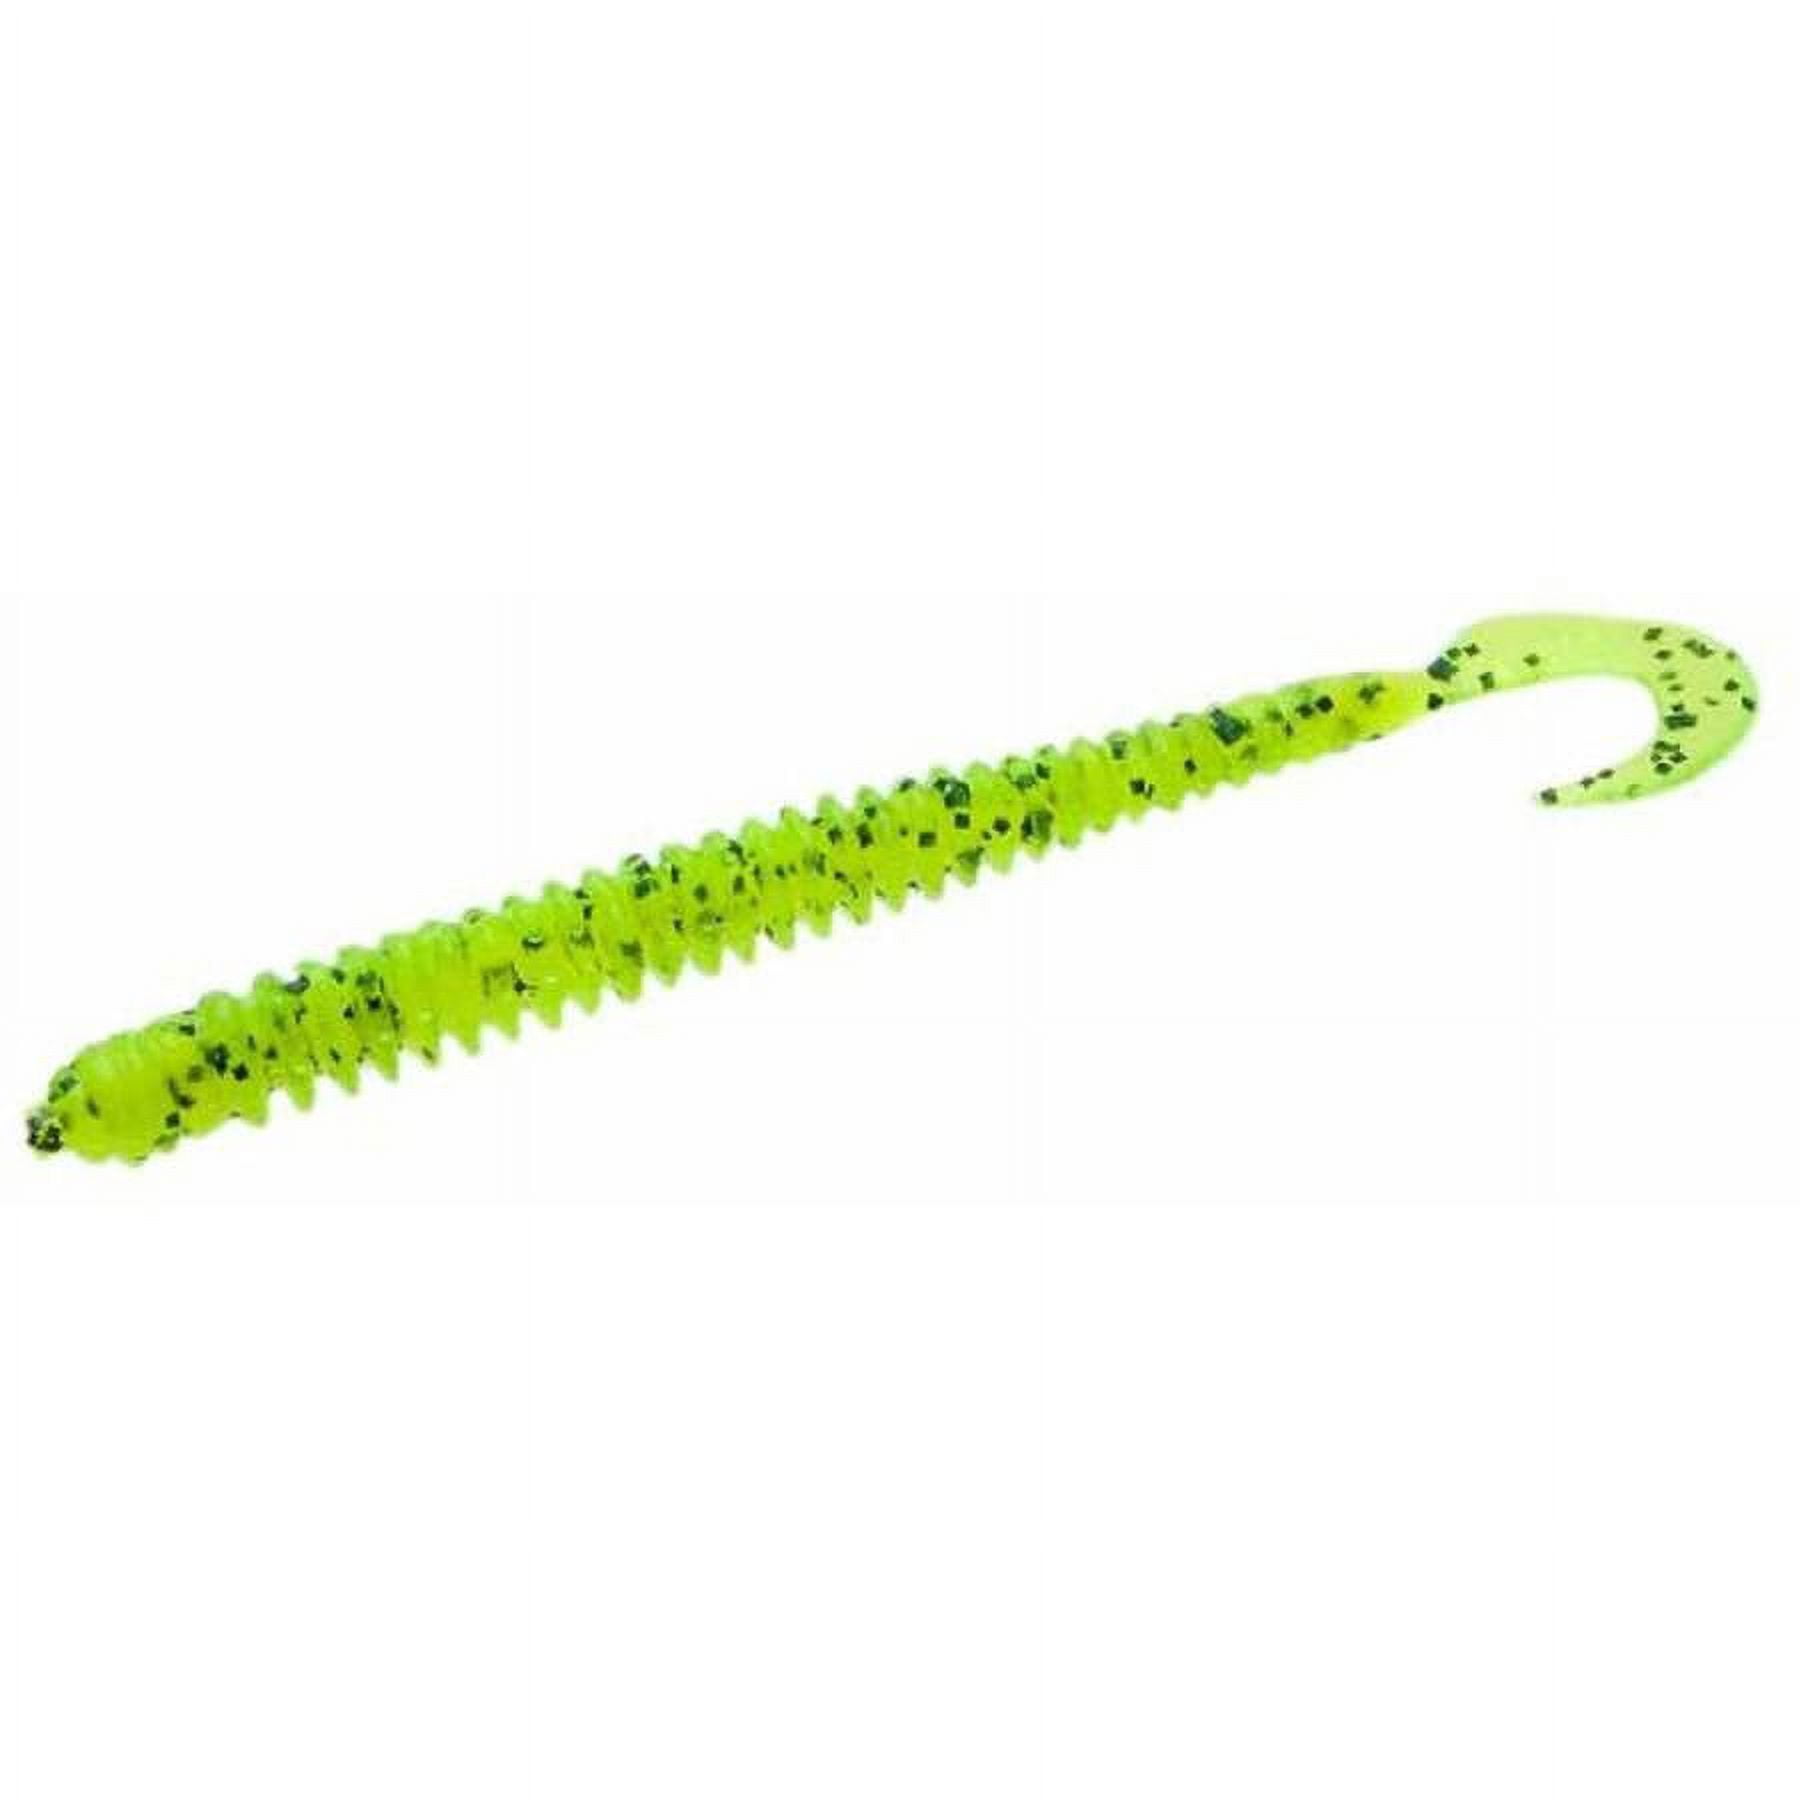 Zoom Dead Ringer Ring Worm Fishing Bait, Watermelon Seed, 4”, 20-pack, Soft  Baits 